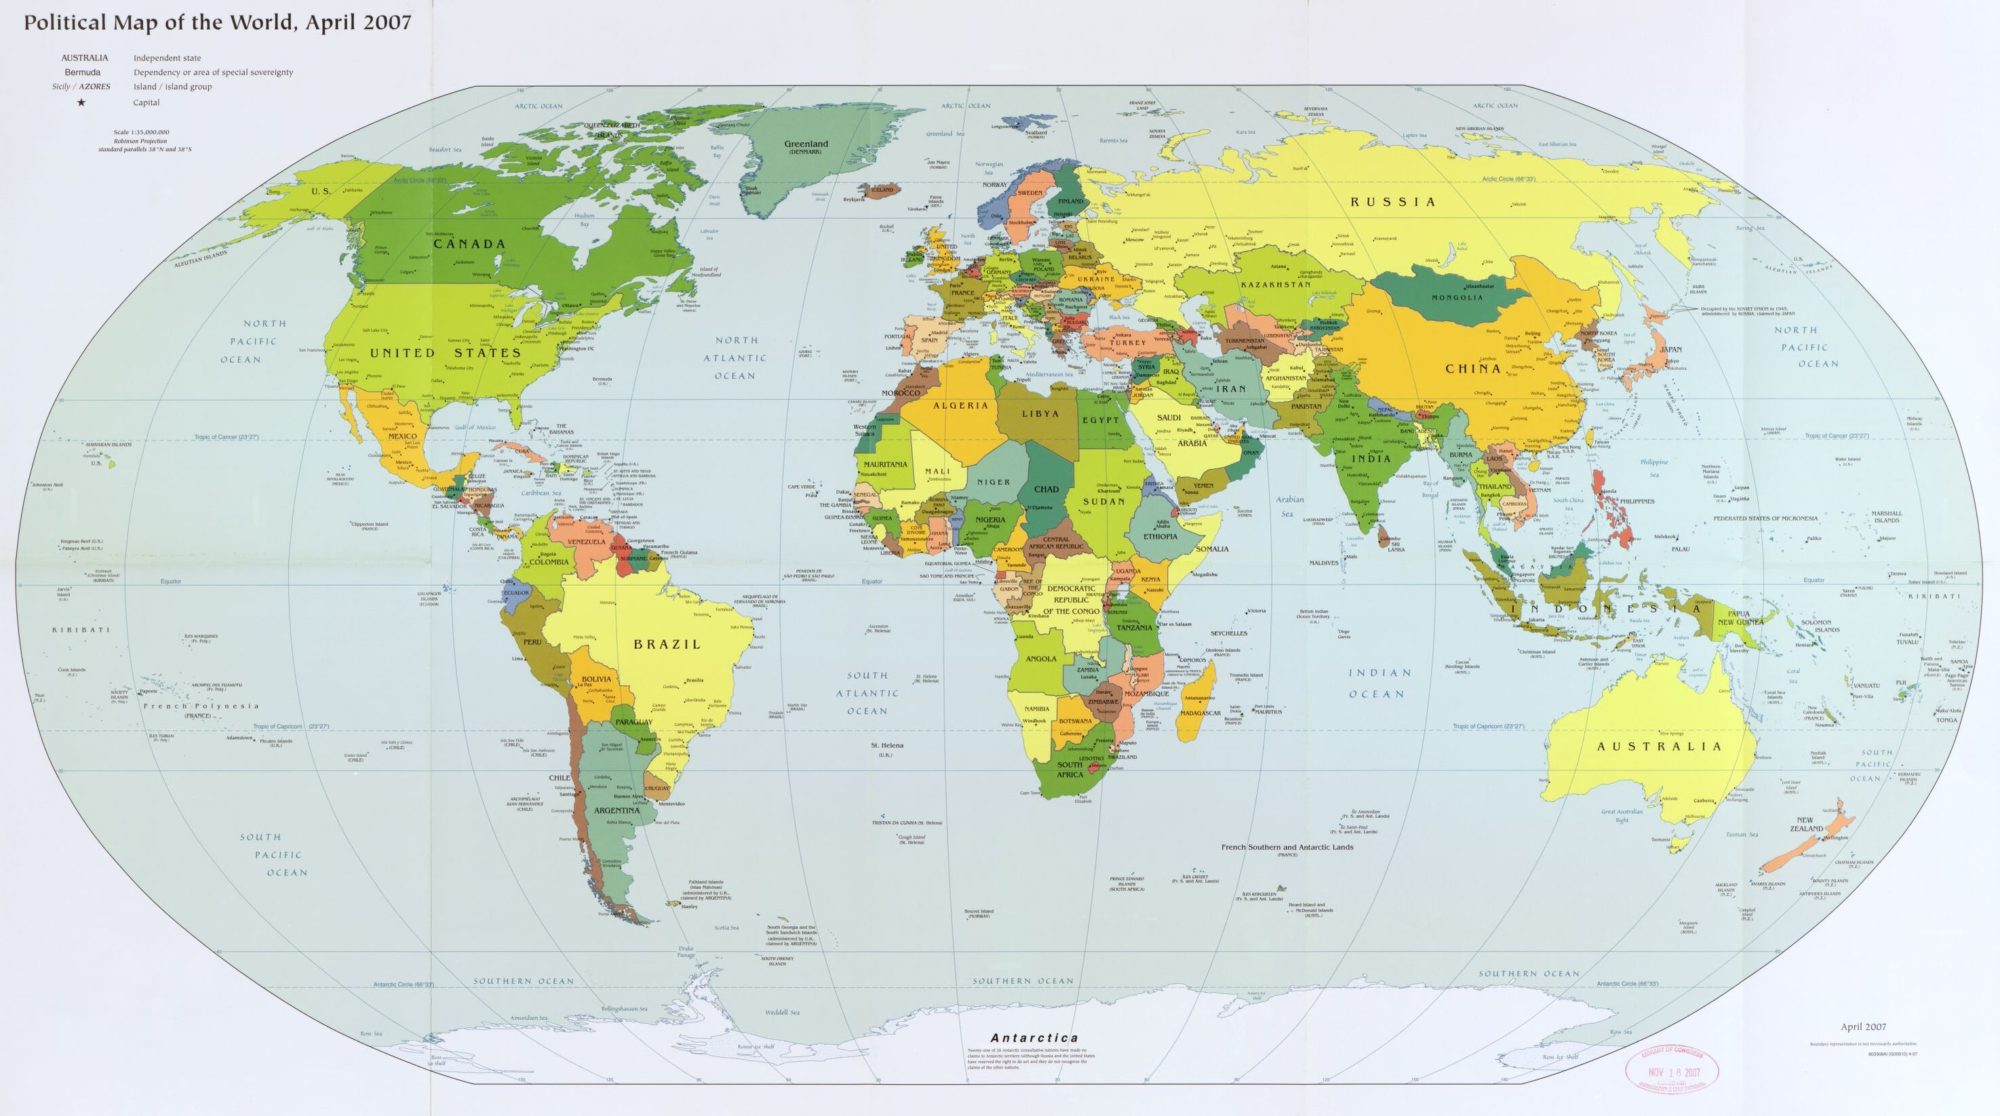 The World Political Map  | April 2007 | Large, Printable Downloadable Map